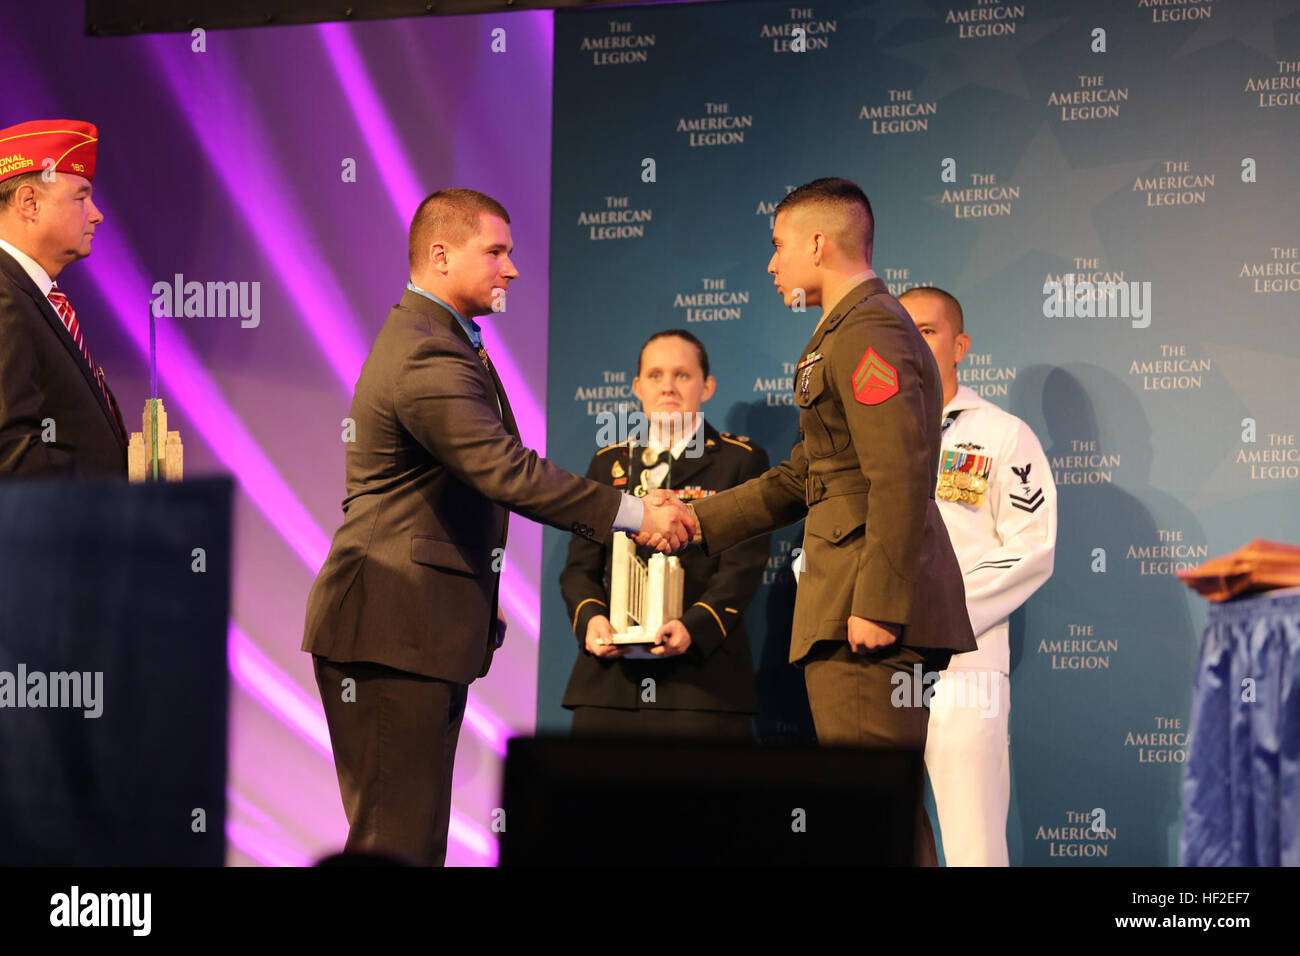 Army Sgt. Kyle White, Medal of Honor recipient, left, shakes hands with Cpl. Ricardo Gonzalez during the American Legion’s 96th National Convention in Charlotte, N.C., Aug. 26, 2014. Gonzalez was awarded the Spirit of Service Award for his exceptional contributions to his local community through volunteer efforts off-duty.  Gonzalez is a Marine Air-Ground Task Force planning specialist with 4th Marine Regiment at Camp Schwab, Okinawa, Japan. Marine awarded American Legion Spirit of Service Award 140826-M-SR938-223 Stock Photo